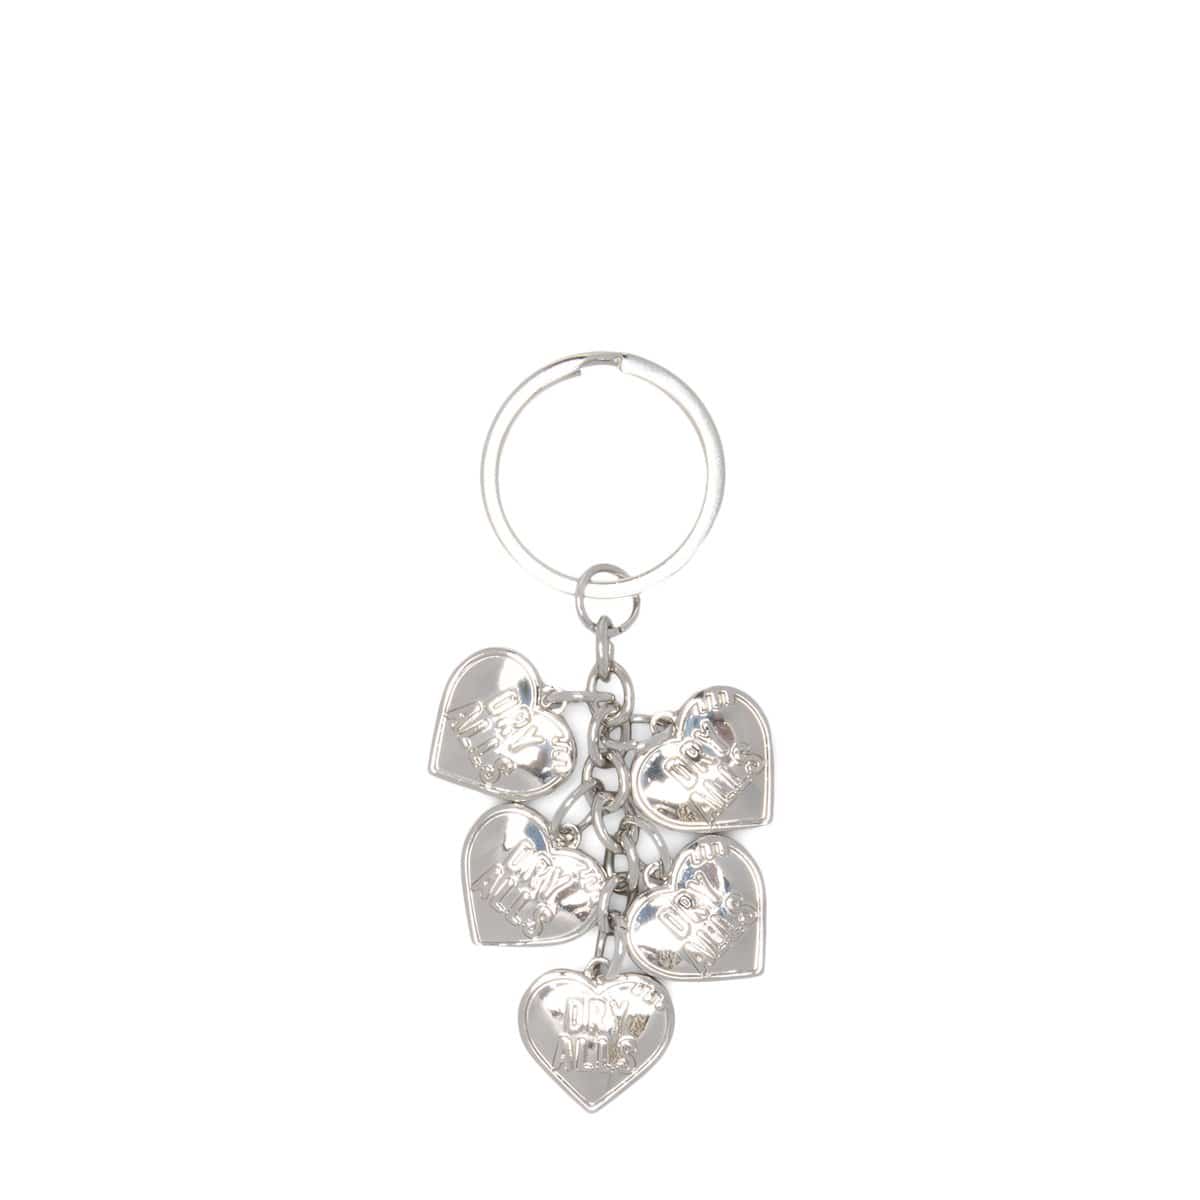 Human Made Bags & Accessories SILVER / O/S HEART KEY CHARM